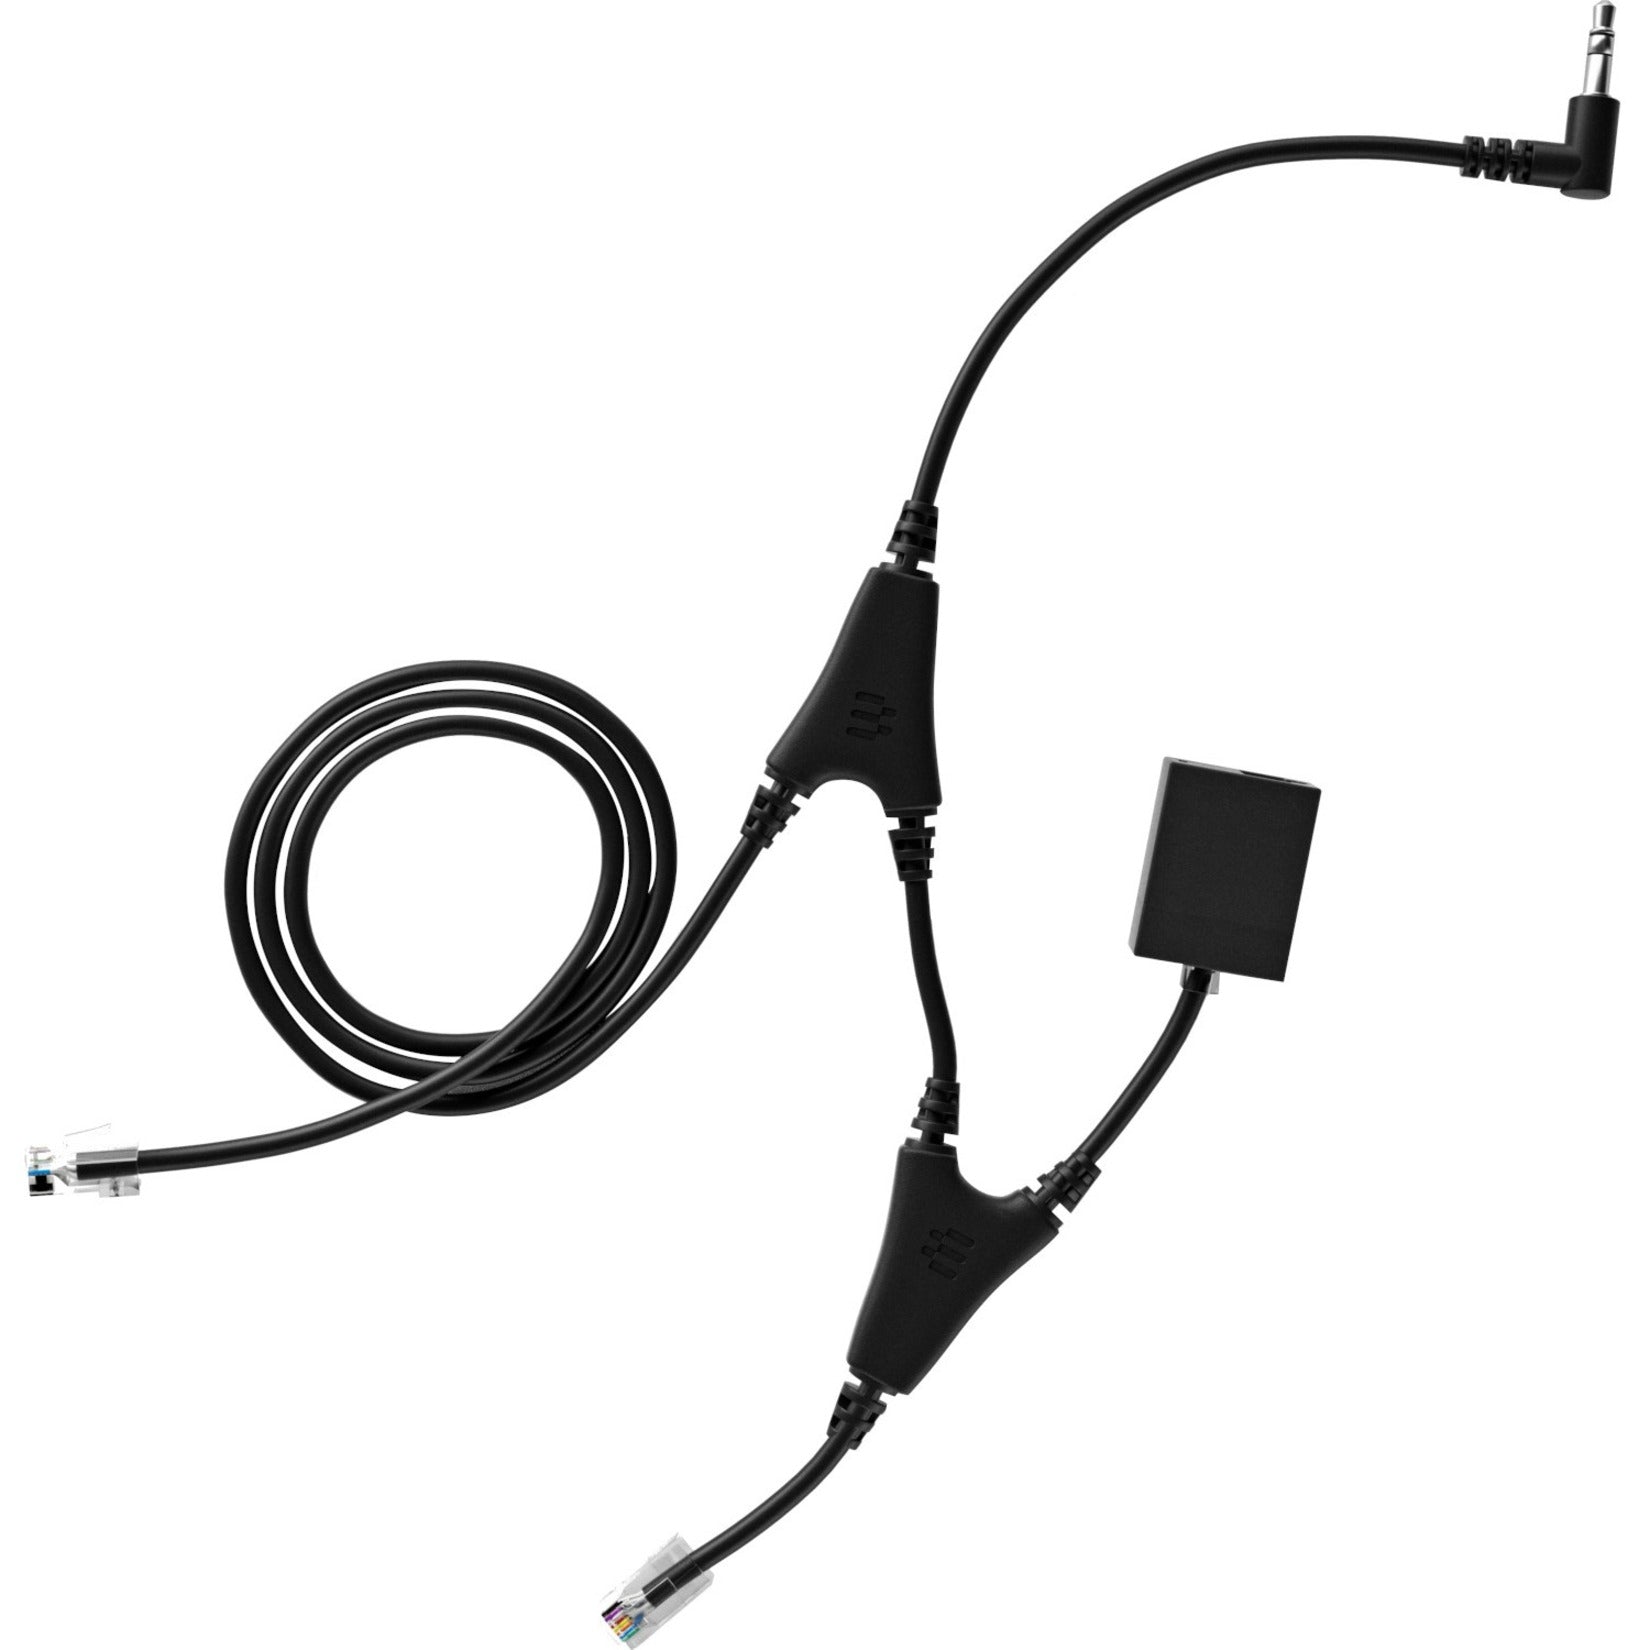 EPOS 1000745 Alcatel Cable for Elec. Hook Switch MSH CEHS-AL 01, Compatible with EPOS Headsets